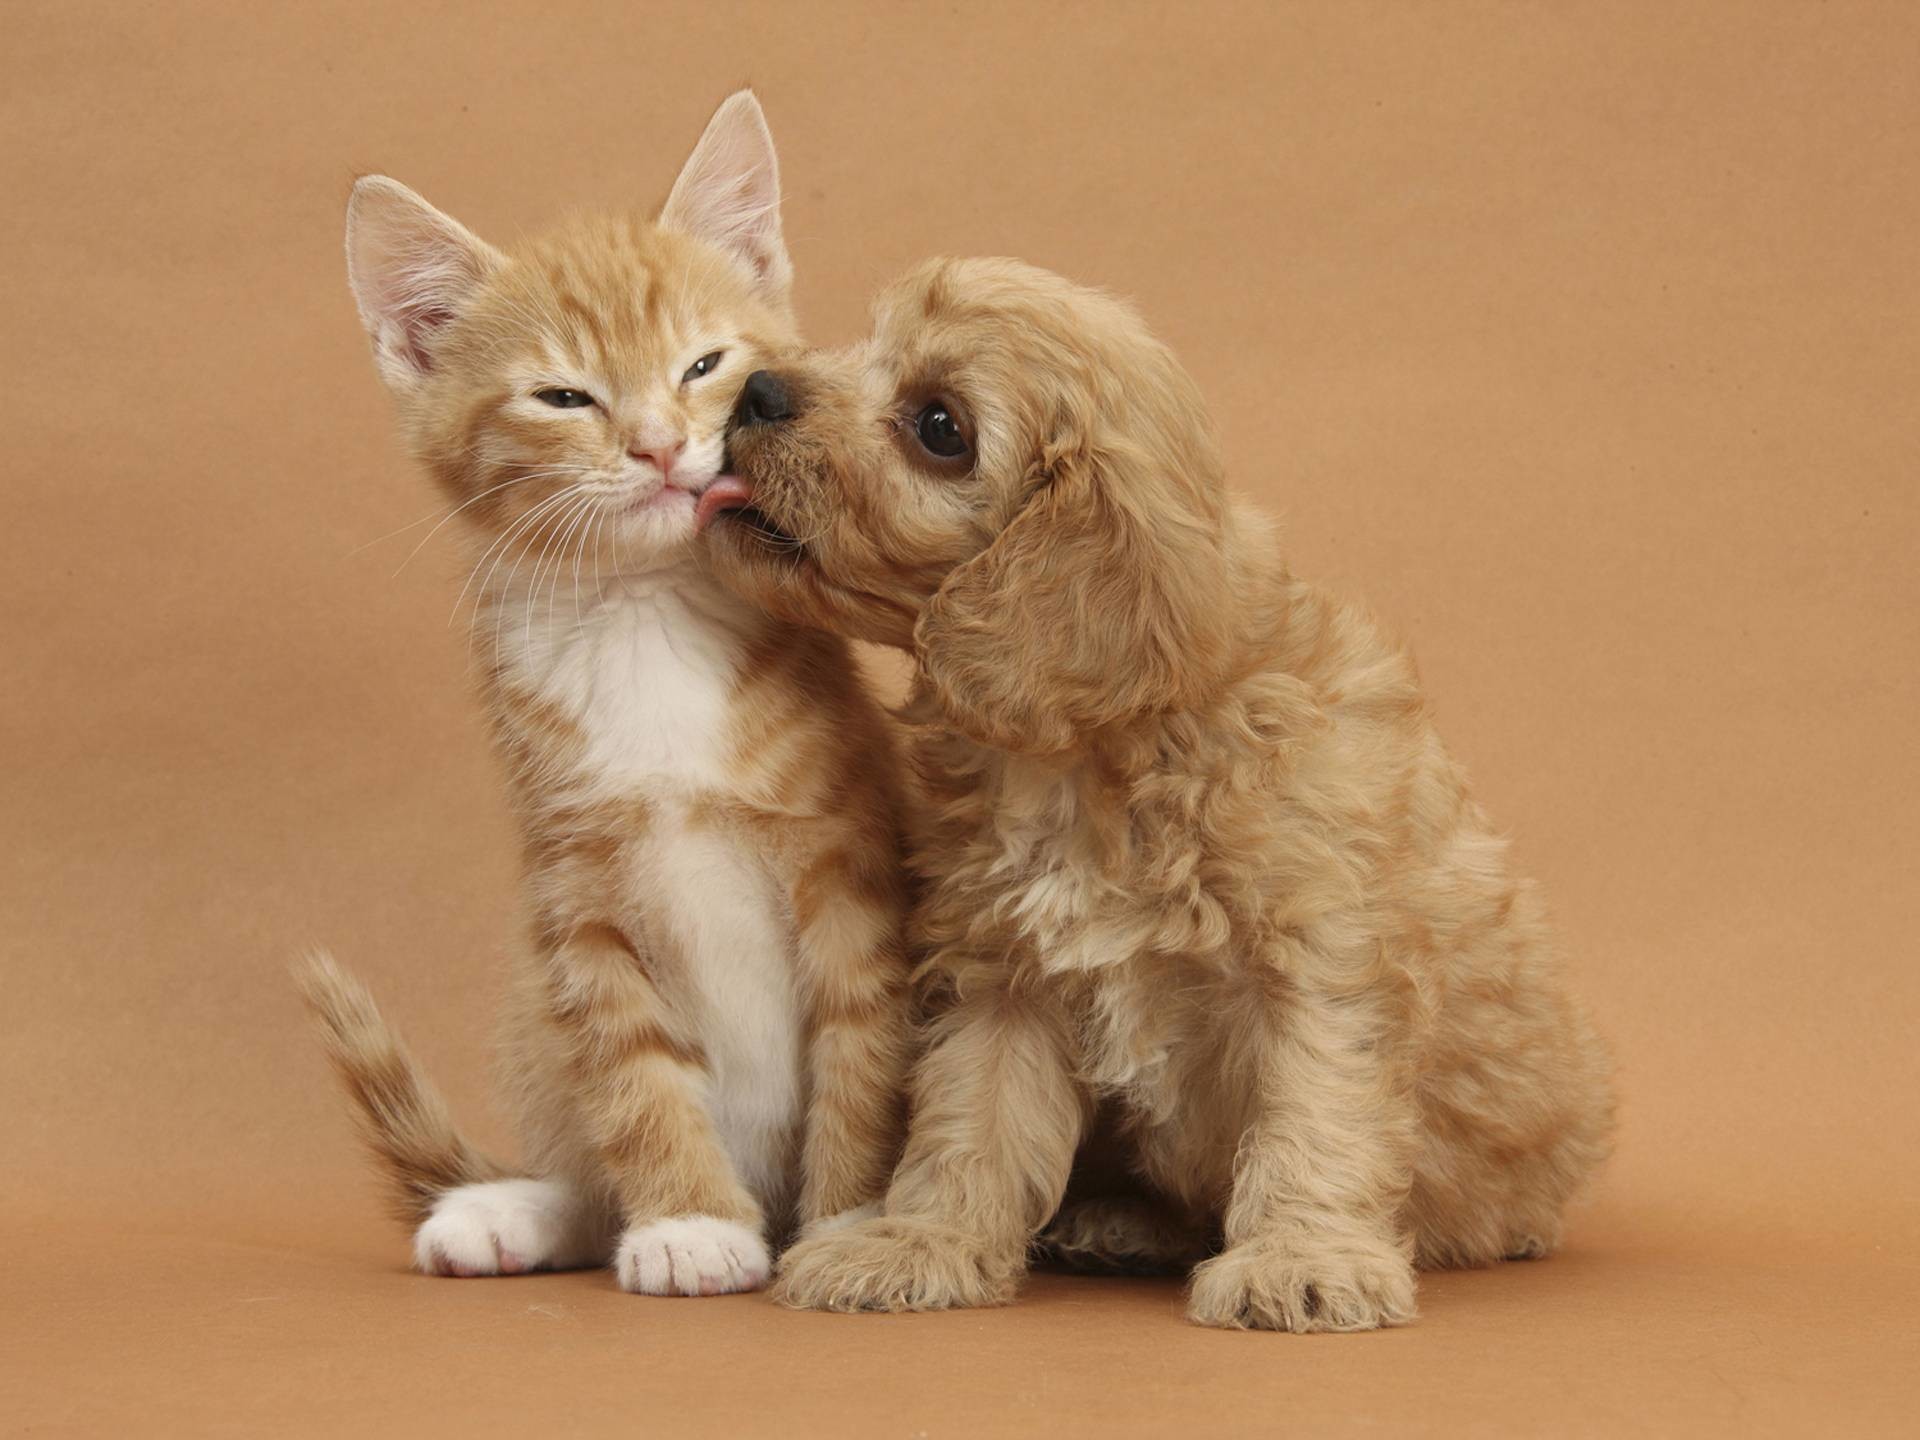 1920x1440 Cute dog and cat - Dogs Wallpaper